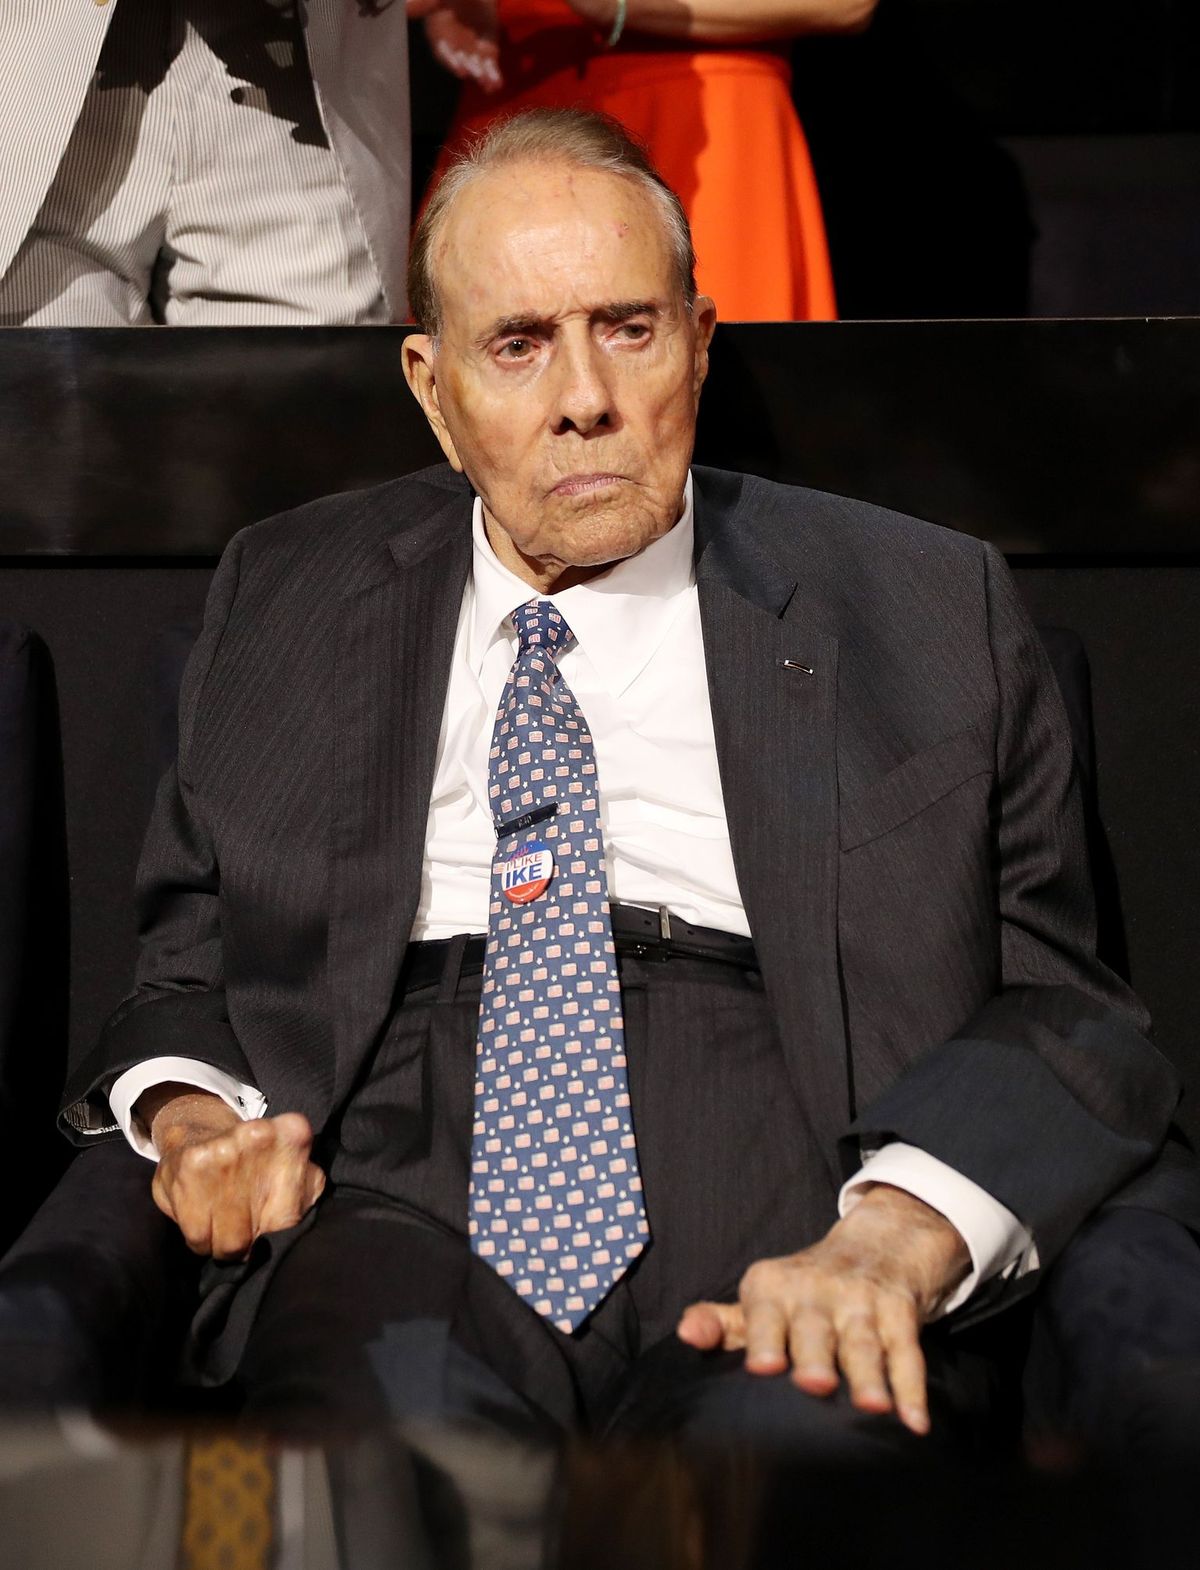 Sen. Bob Dole at the first day of the Republican National Convention on July 18, 2016 | Getty Images